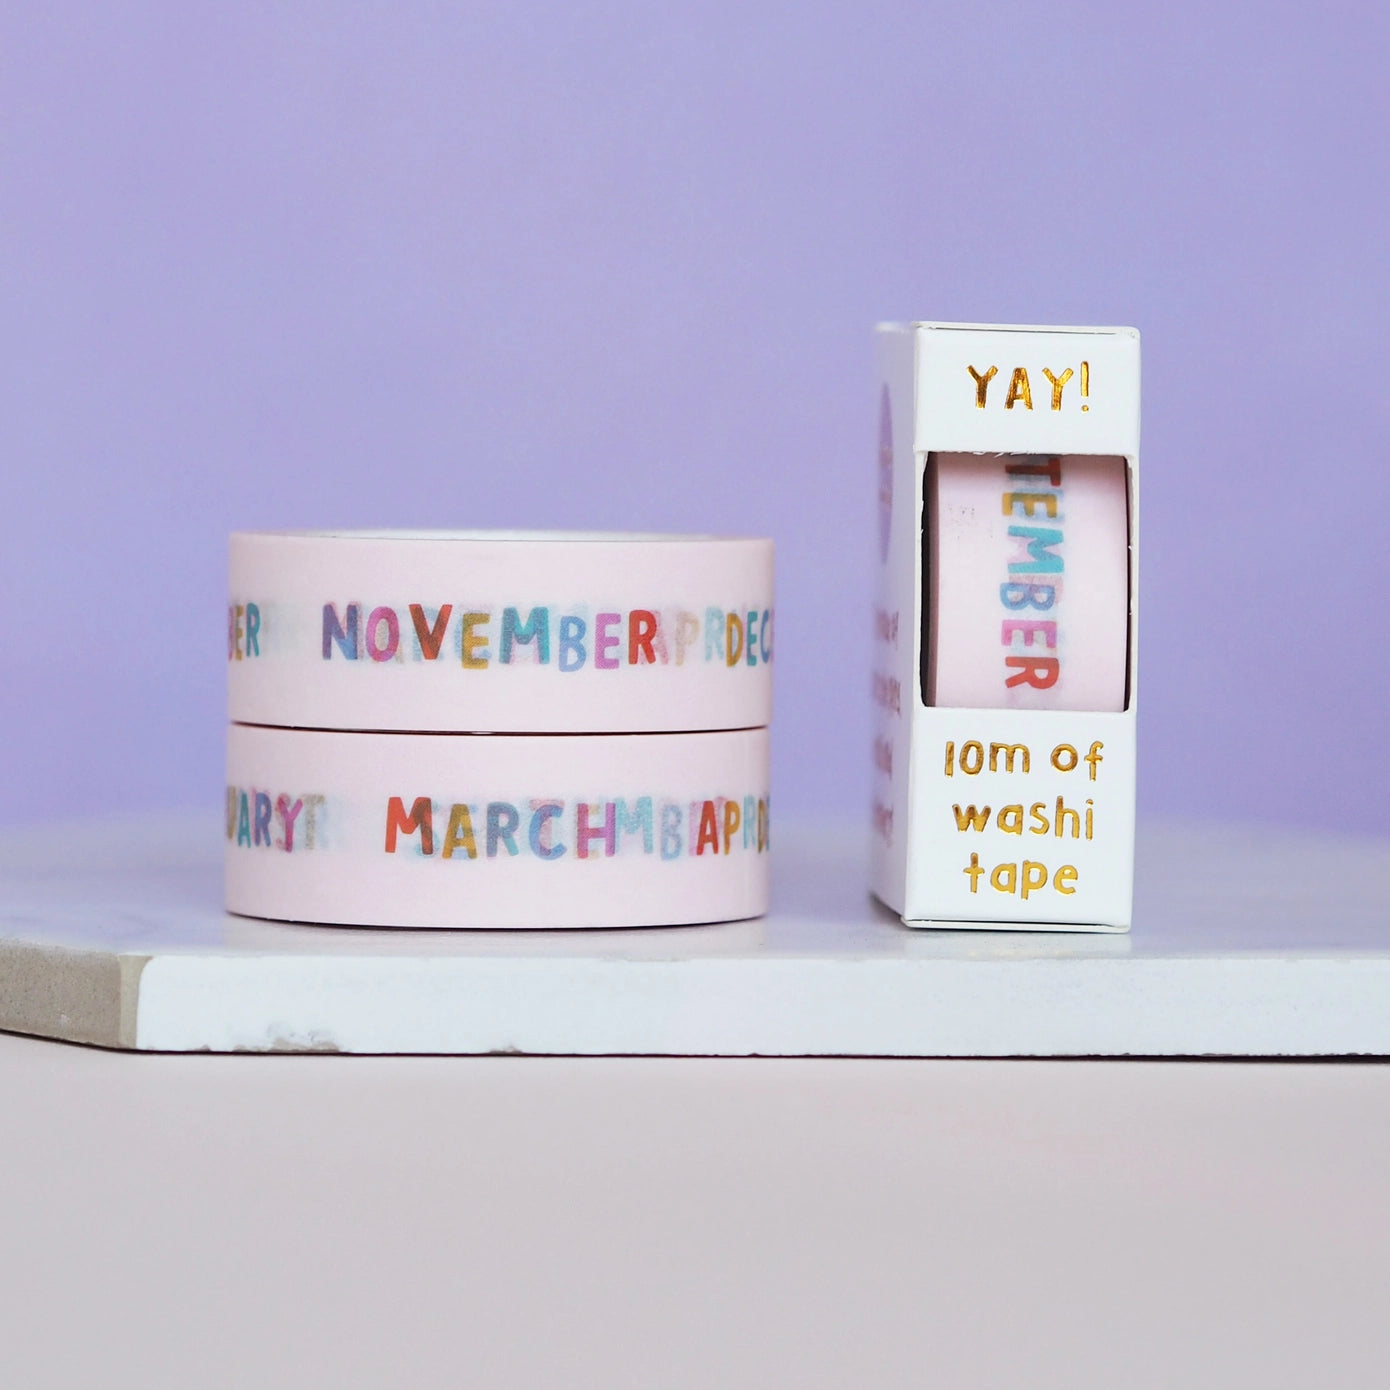 Months of the year - Washi tape